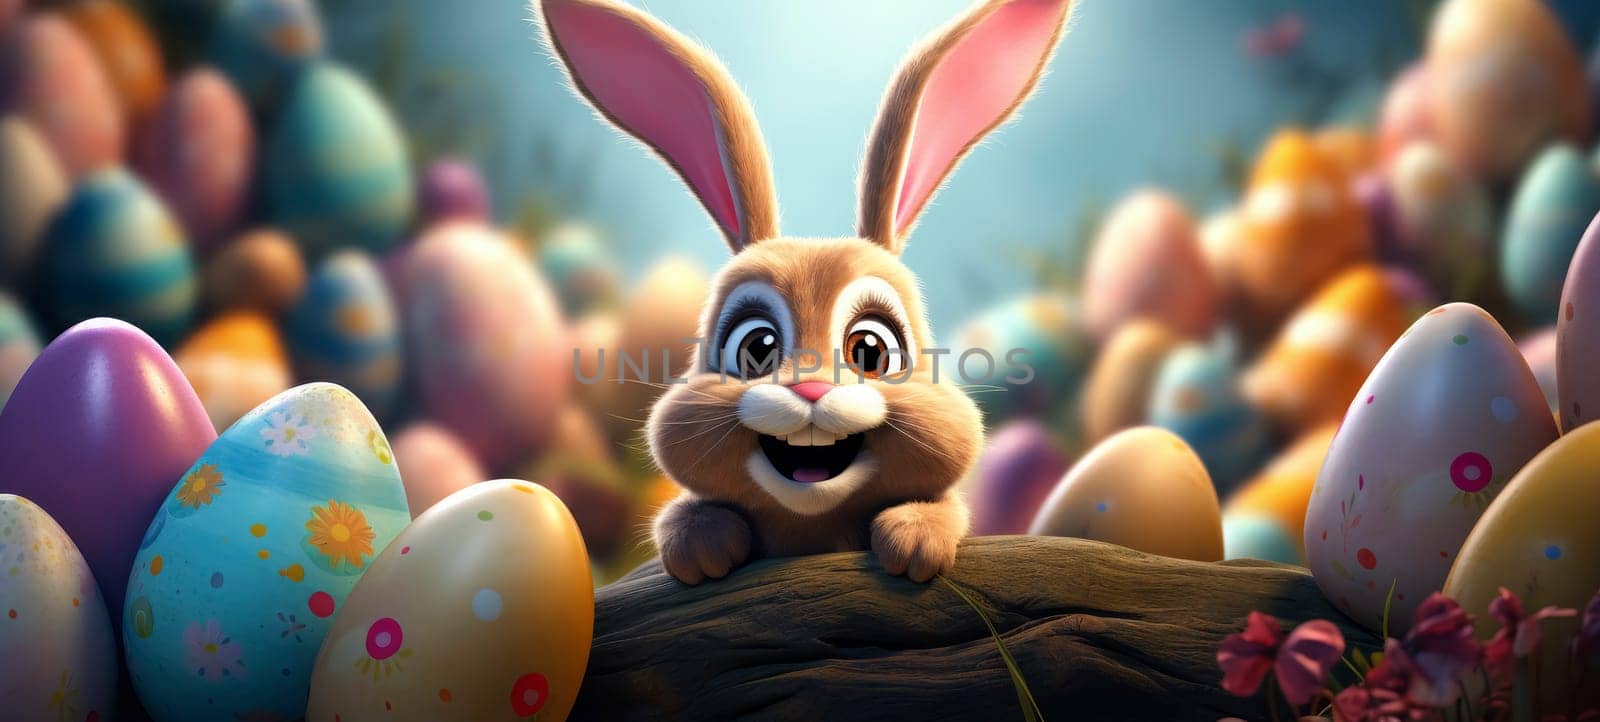 Animated rabbit peeking over log with colorful Easter eggs. Digital art illustration for Easter holiday and greeting card design